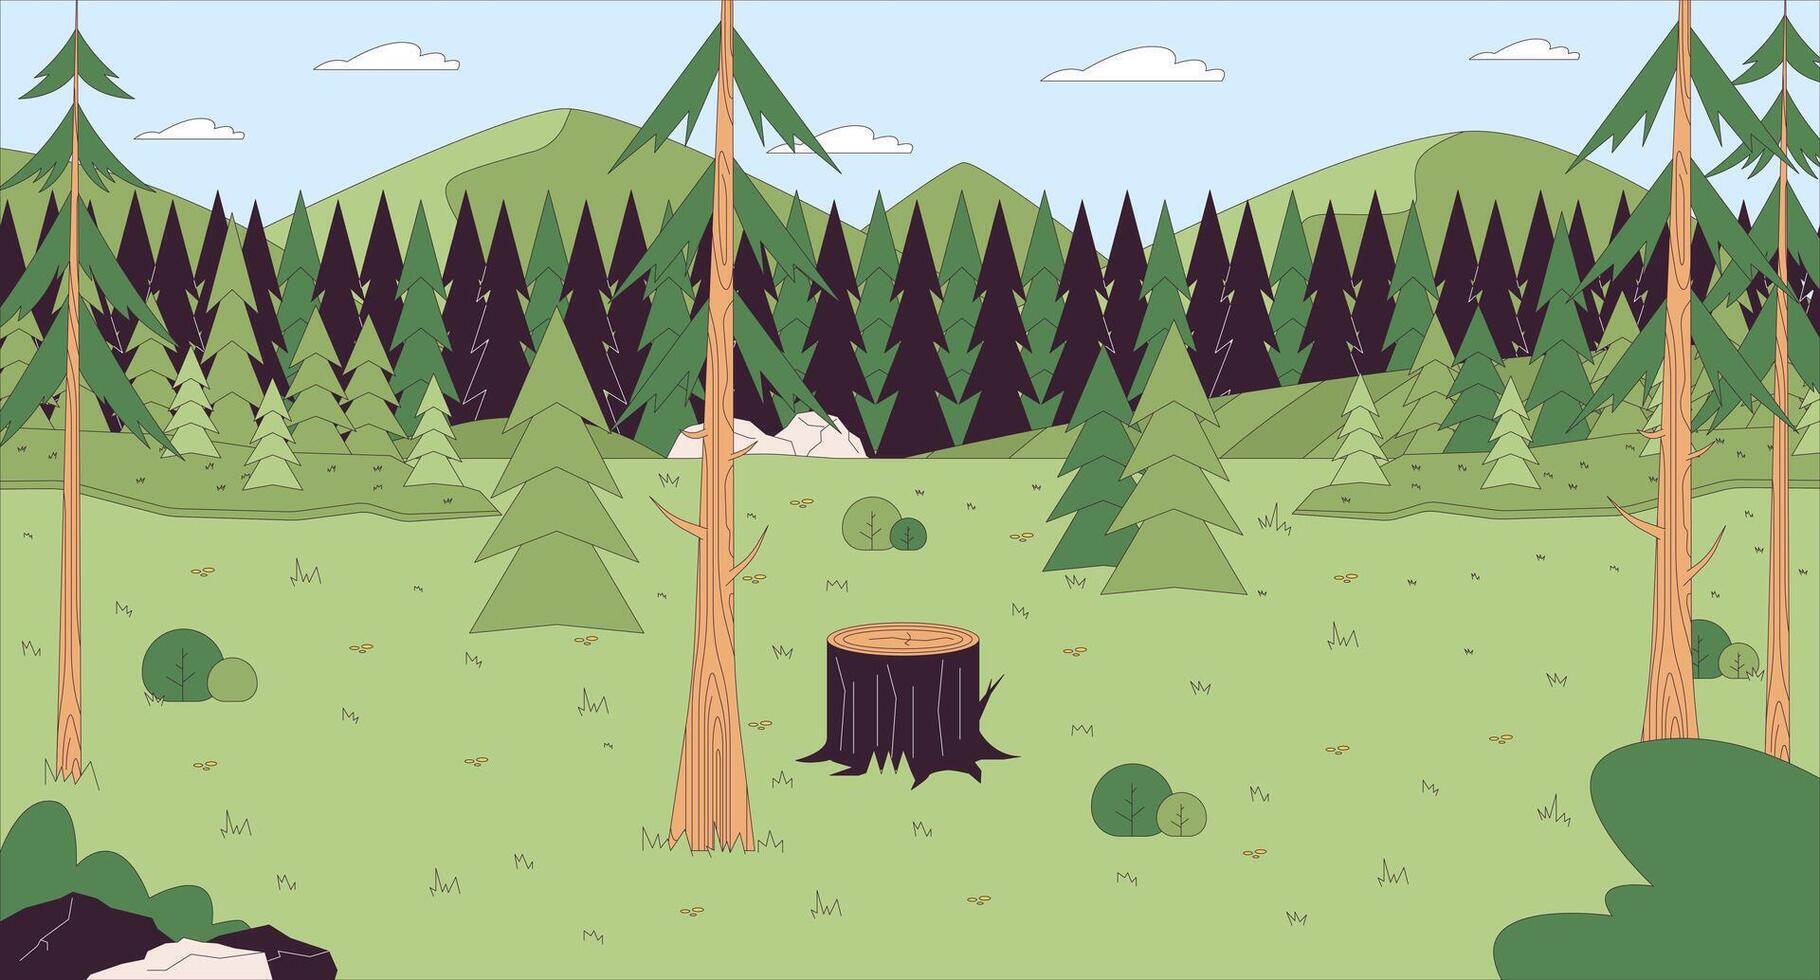 Glade forest pines cartoon flat illustration. Stump of tree woodland spruces 2D line scenery colorful background. Summer landscaping spring season. Grass woods scene vector storytelling image